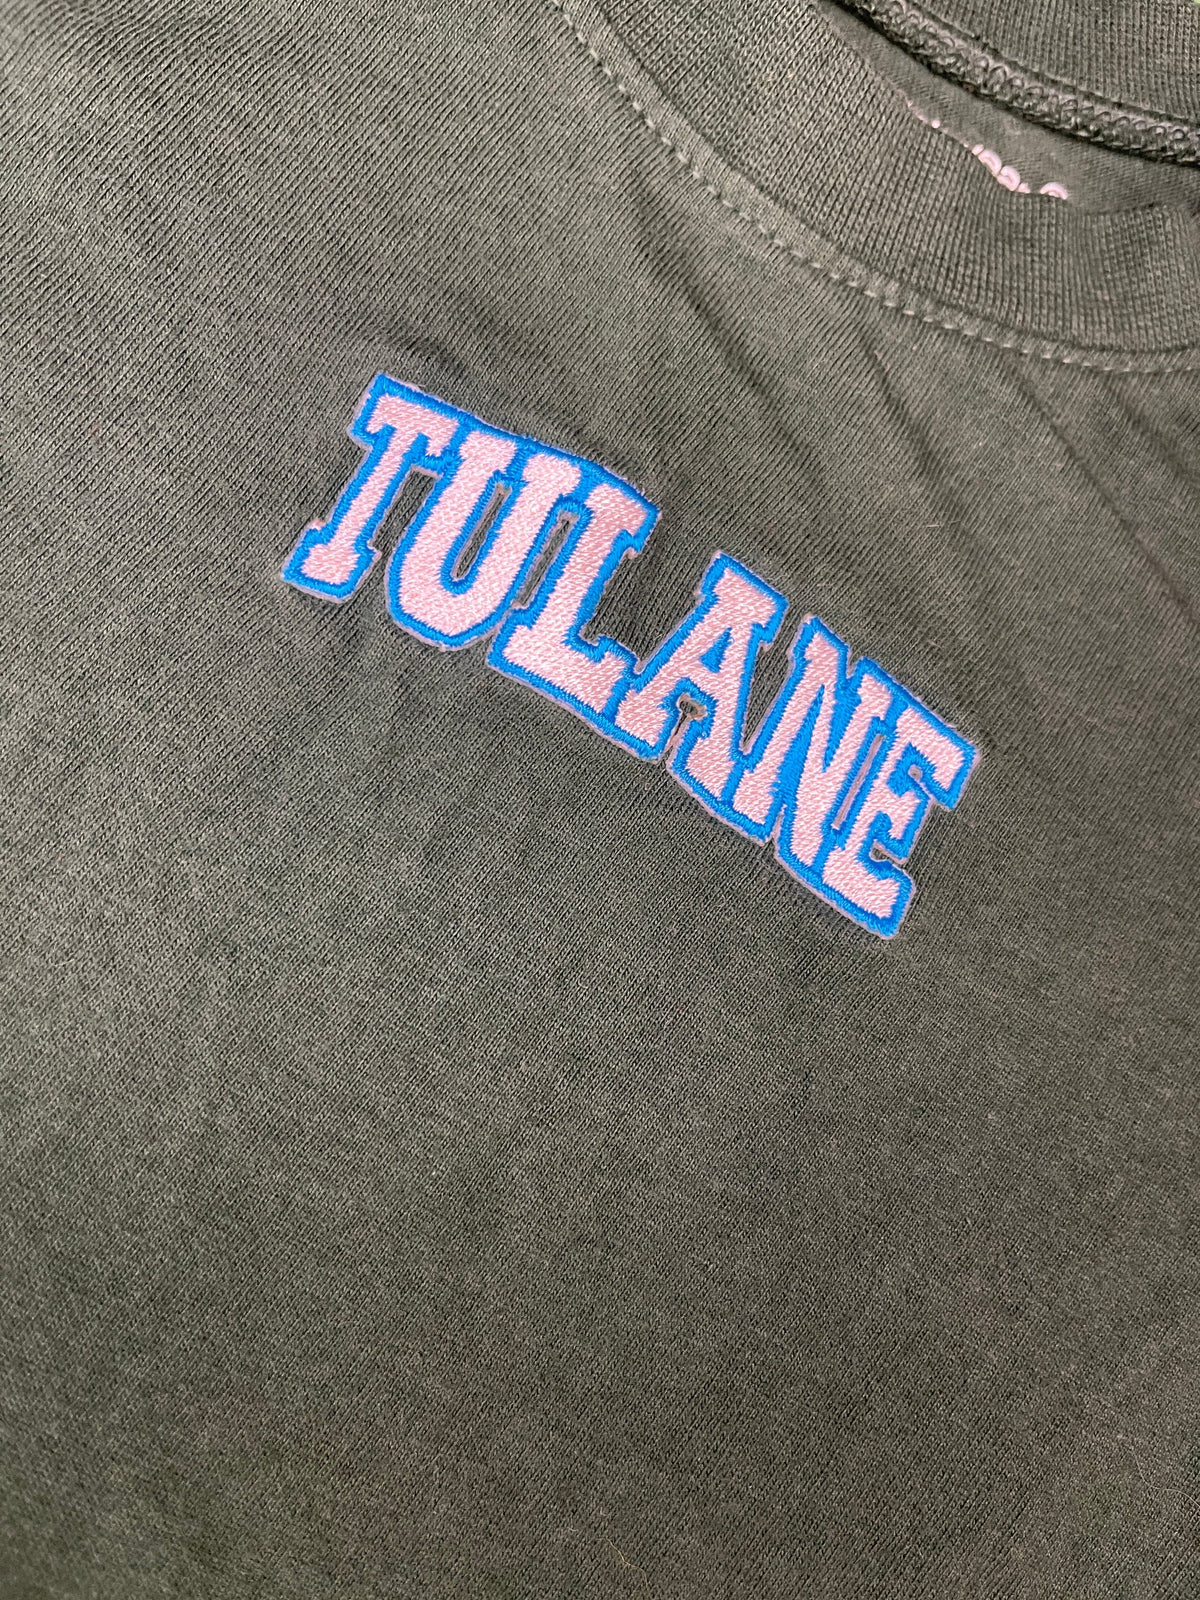 NCAA Tulane Green Wave Infant Baby T-Shirt 3-6 Months